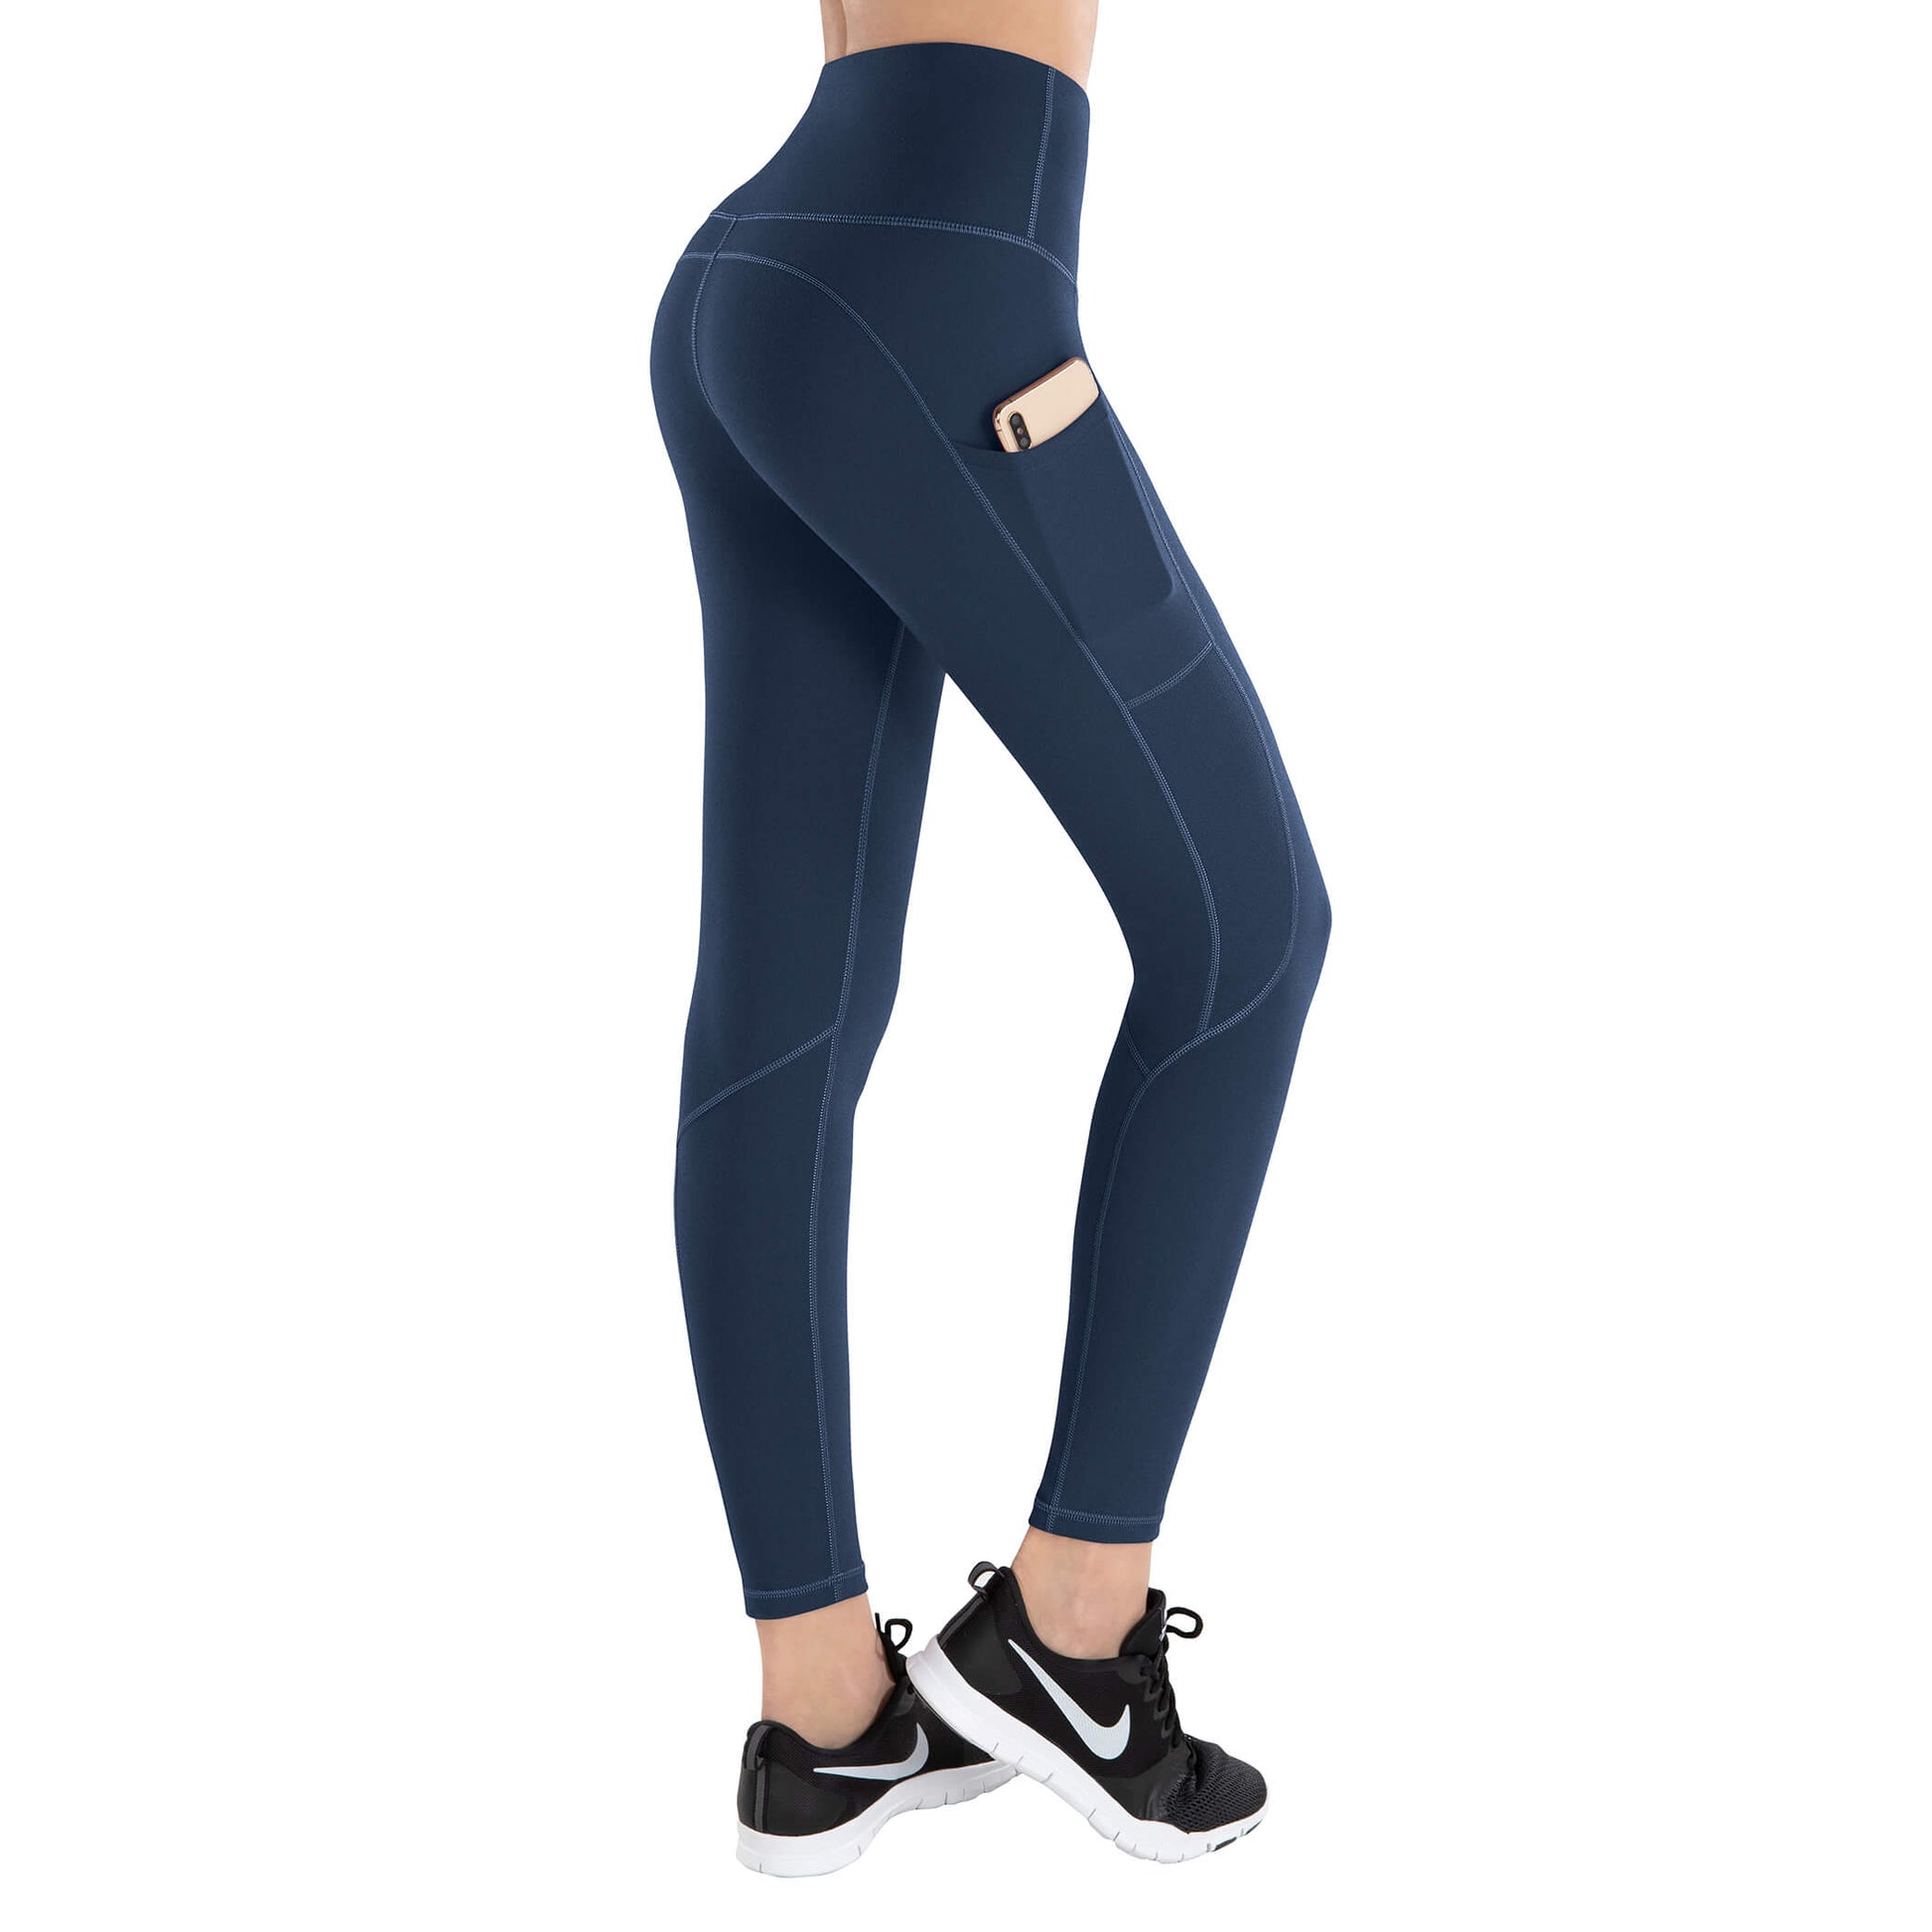 LifeSky Capris Bootcut Yoga Pants for Women with Pockets, High